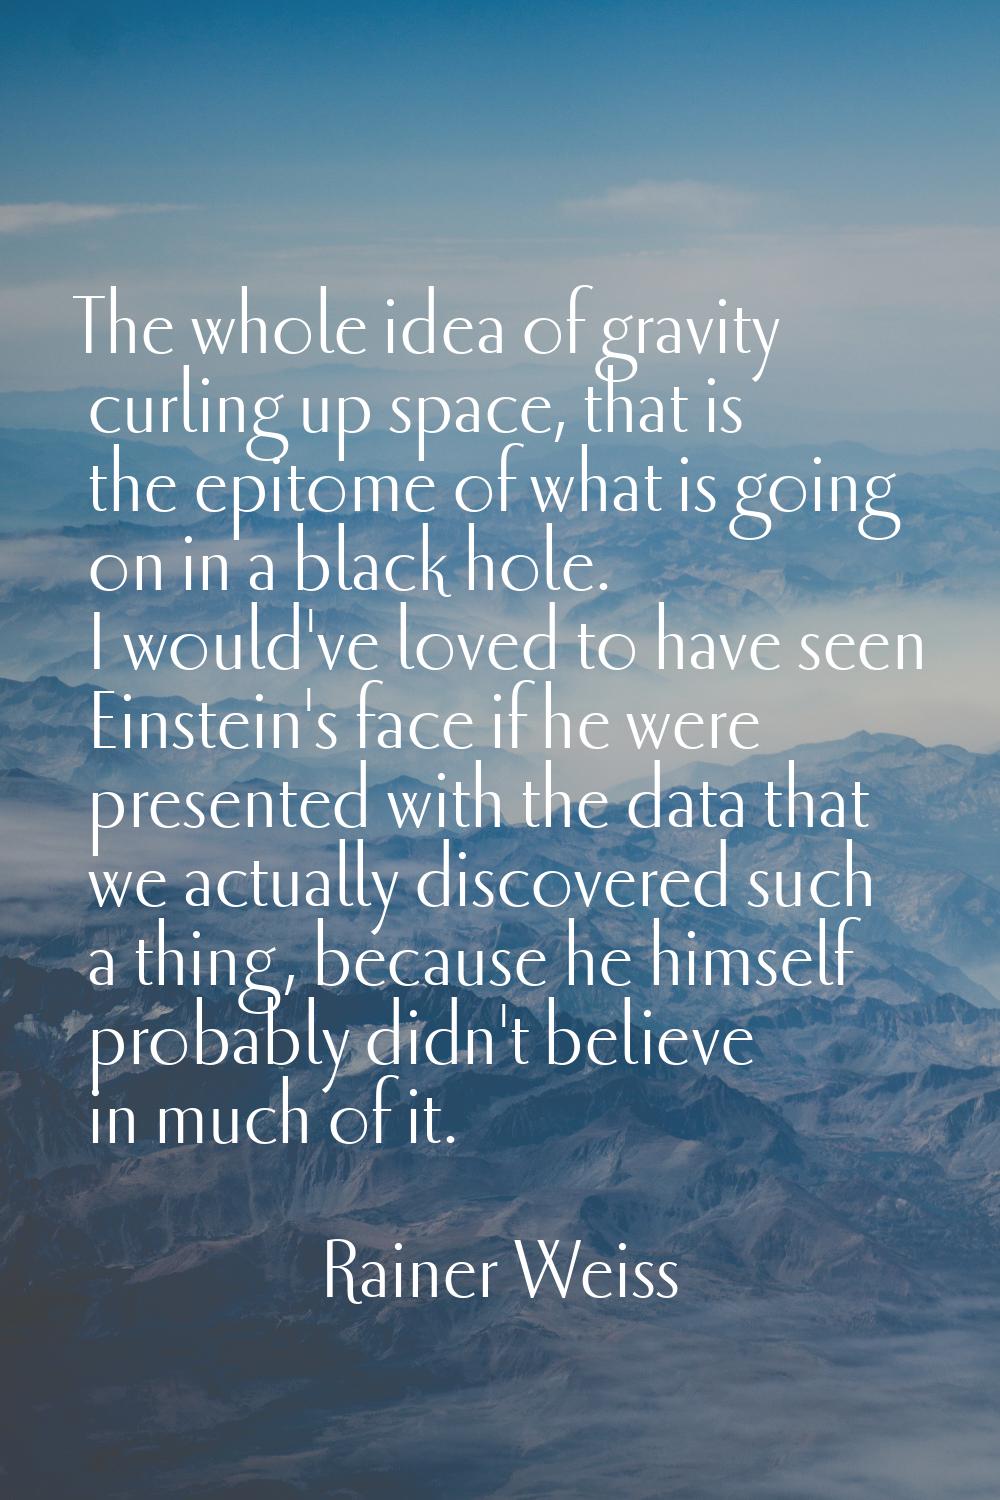 The whole idea of gravity curling up space, that is the epitome of what is going on in a black hole